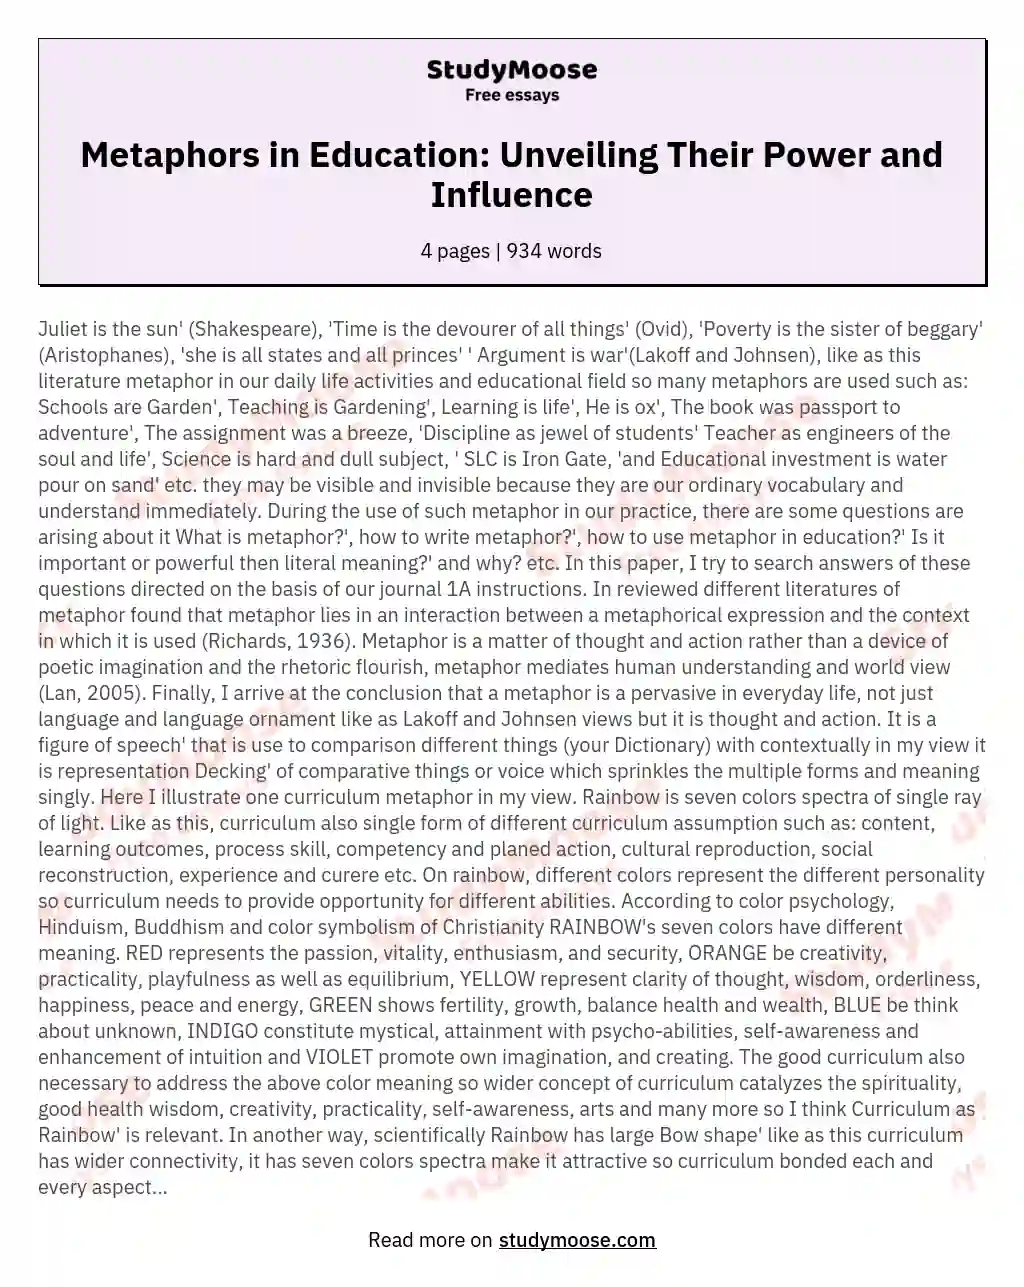 Metaphors in Education: Unveiling Their Power and Influence essay